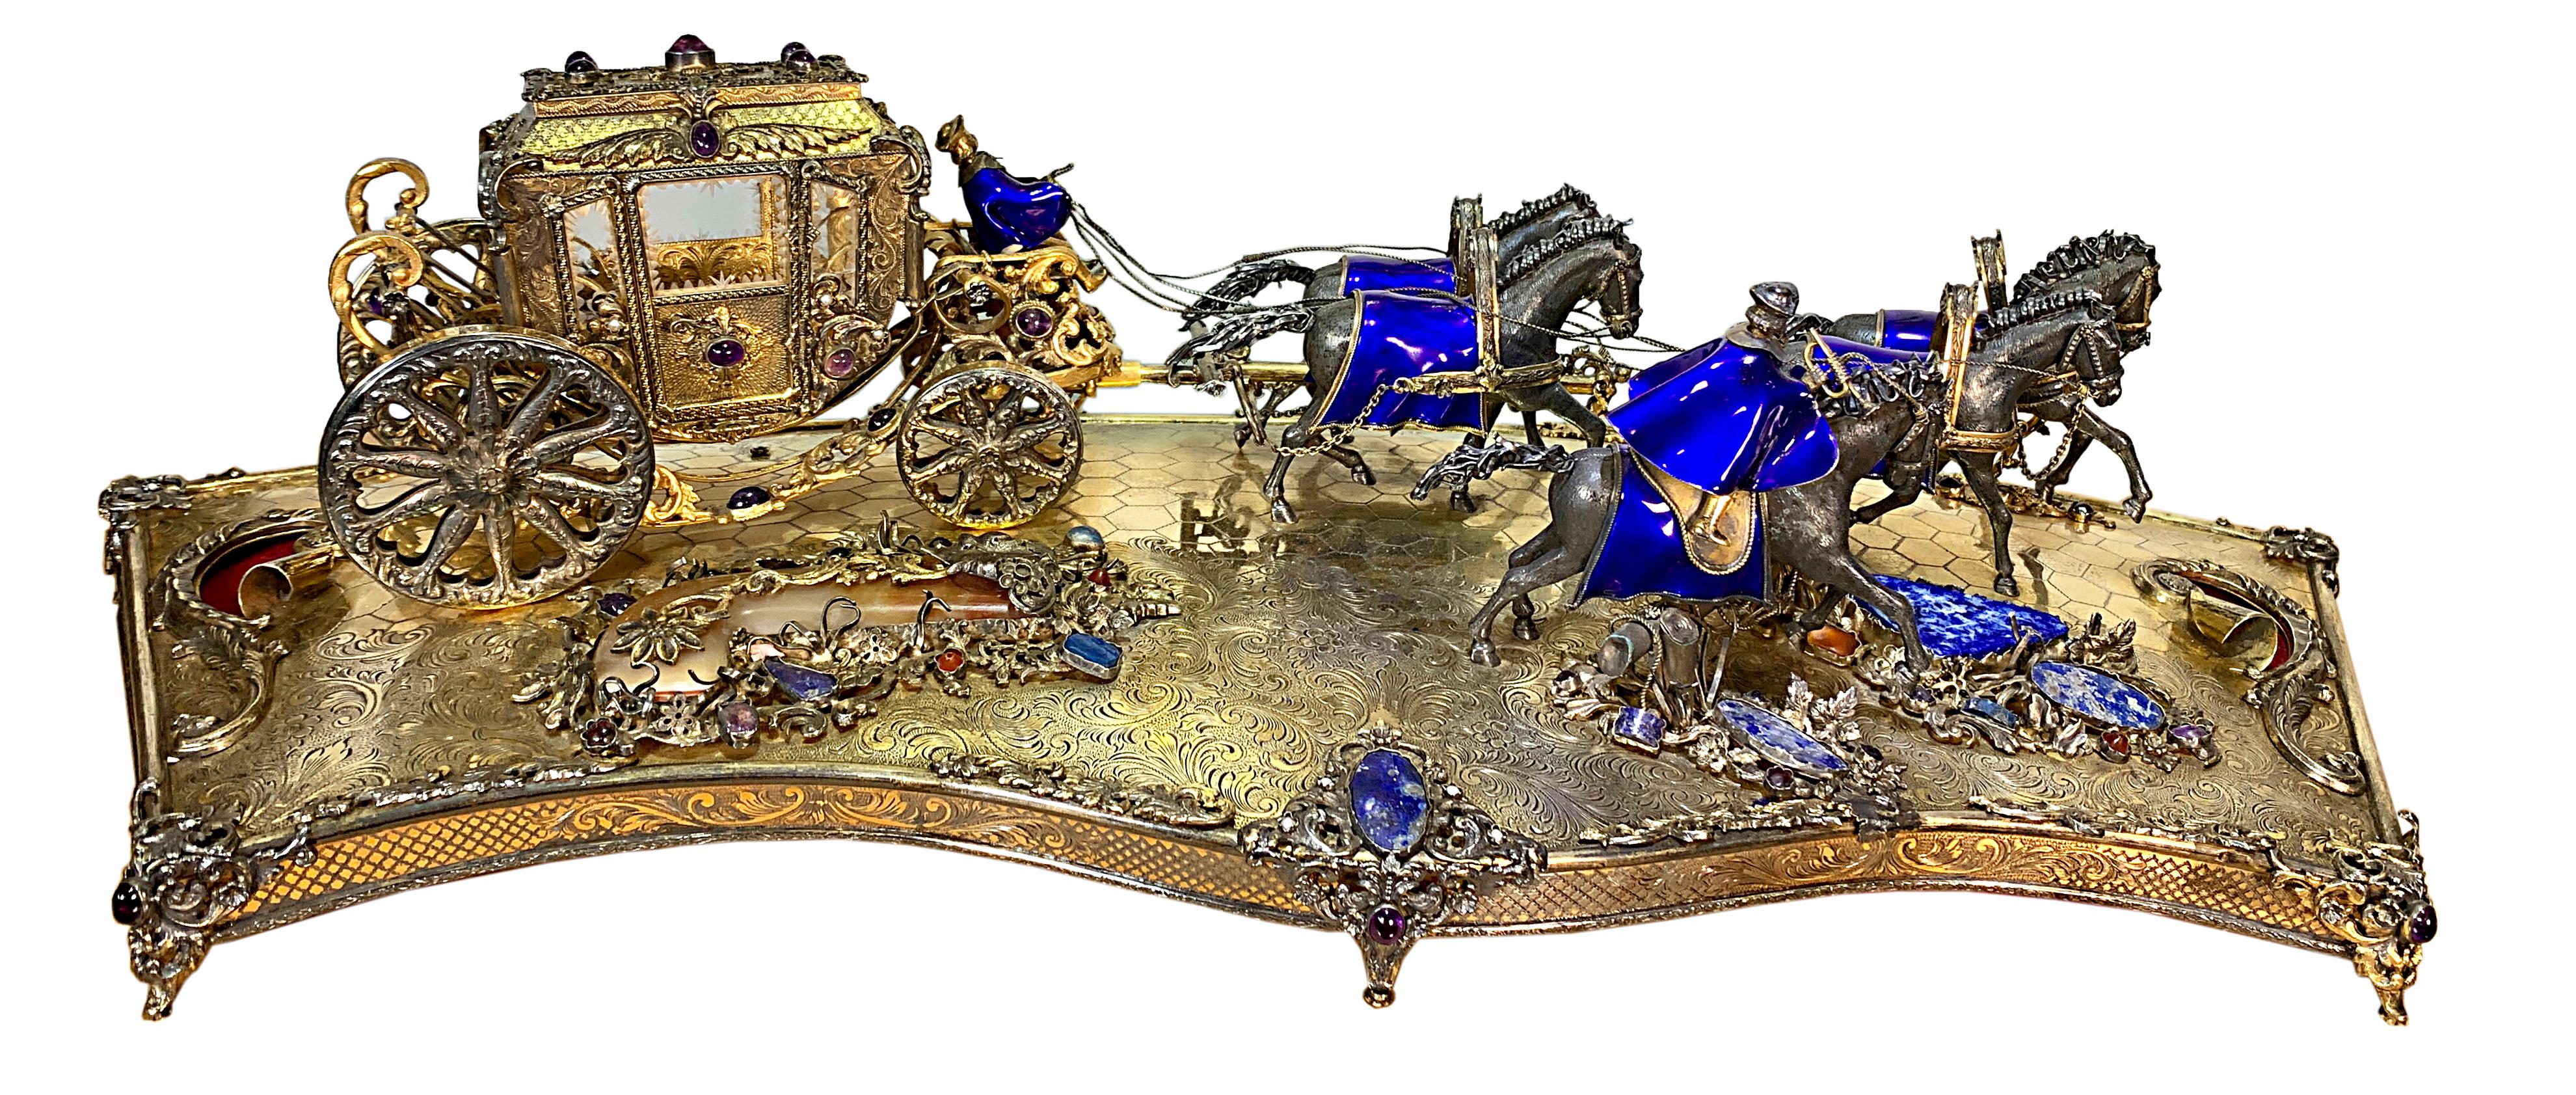 This magnificent Austro-Hungarian silver parcel gilt model of horse-drawn carriage features a total of five gracefully galloping horses. four horses pulling a majestic carriage mounted with various semi-precious stones with driven by a coachman; the